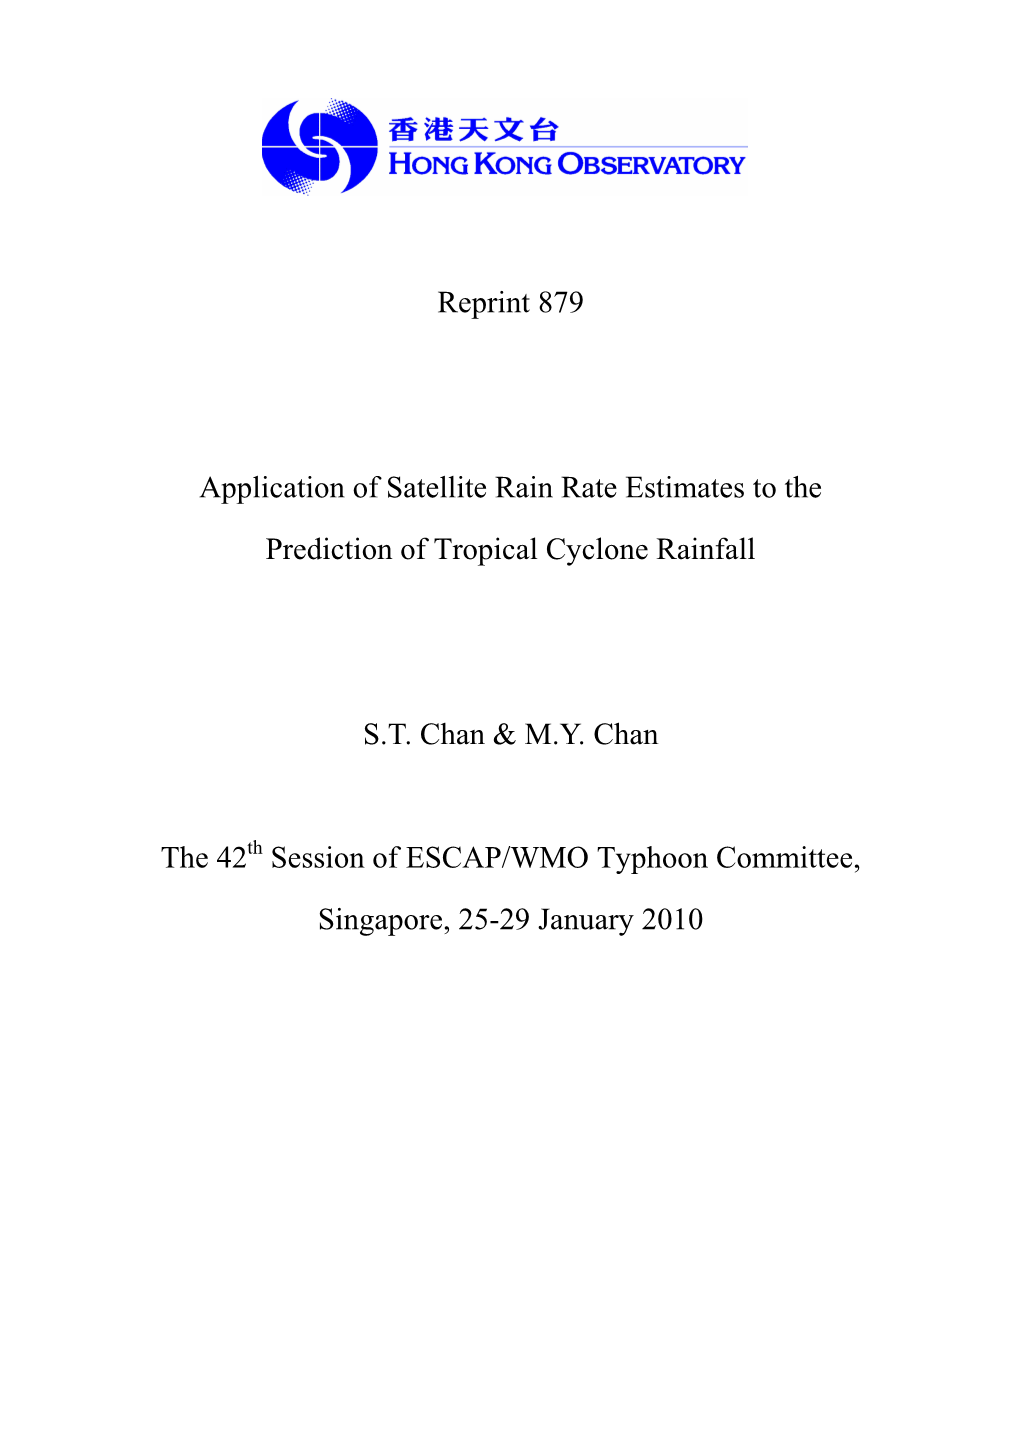 Reprint 879 Application of Satellite Rain Rate Estimates to the Prediction of Tropical Cyclone Rainfall S.T. Chan & M.Y. Ch